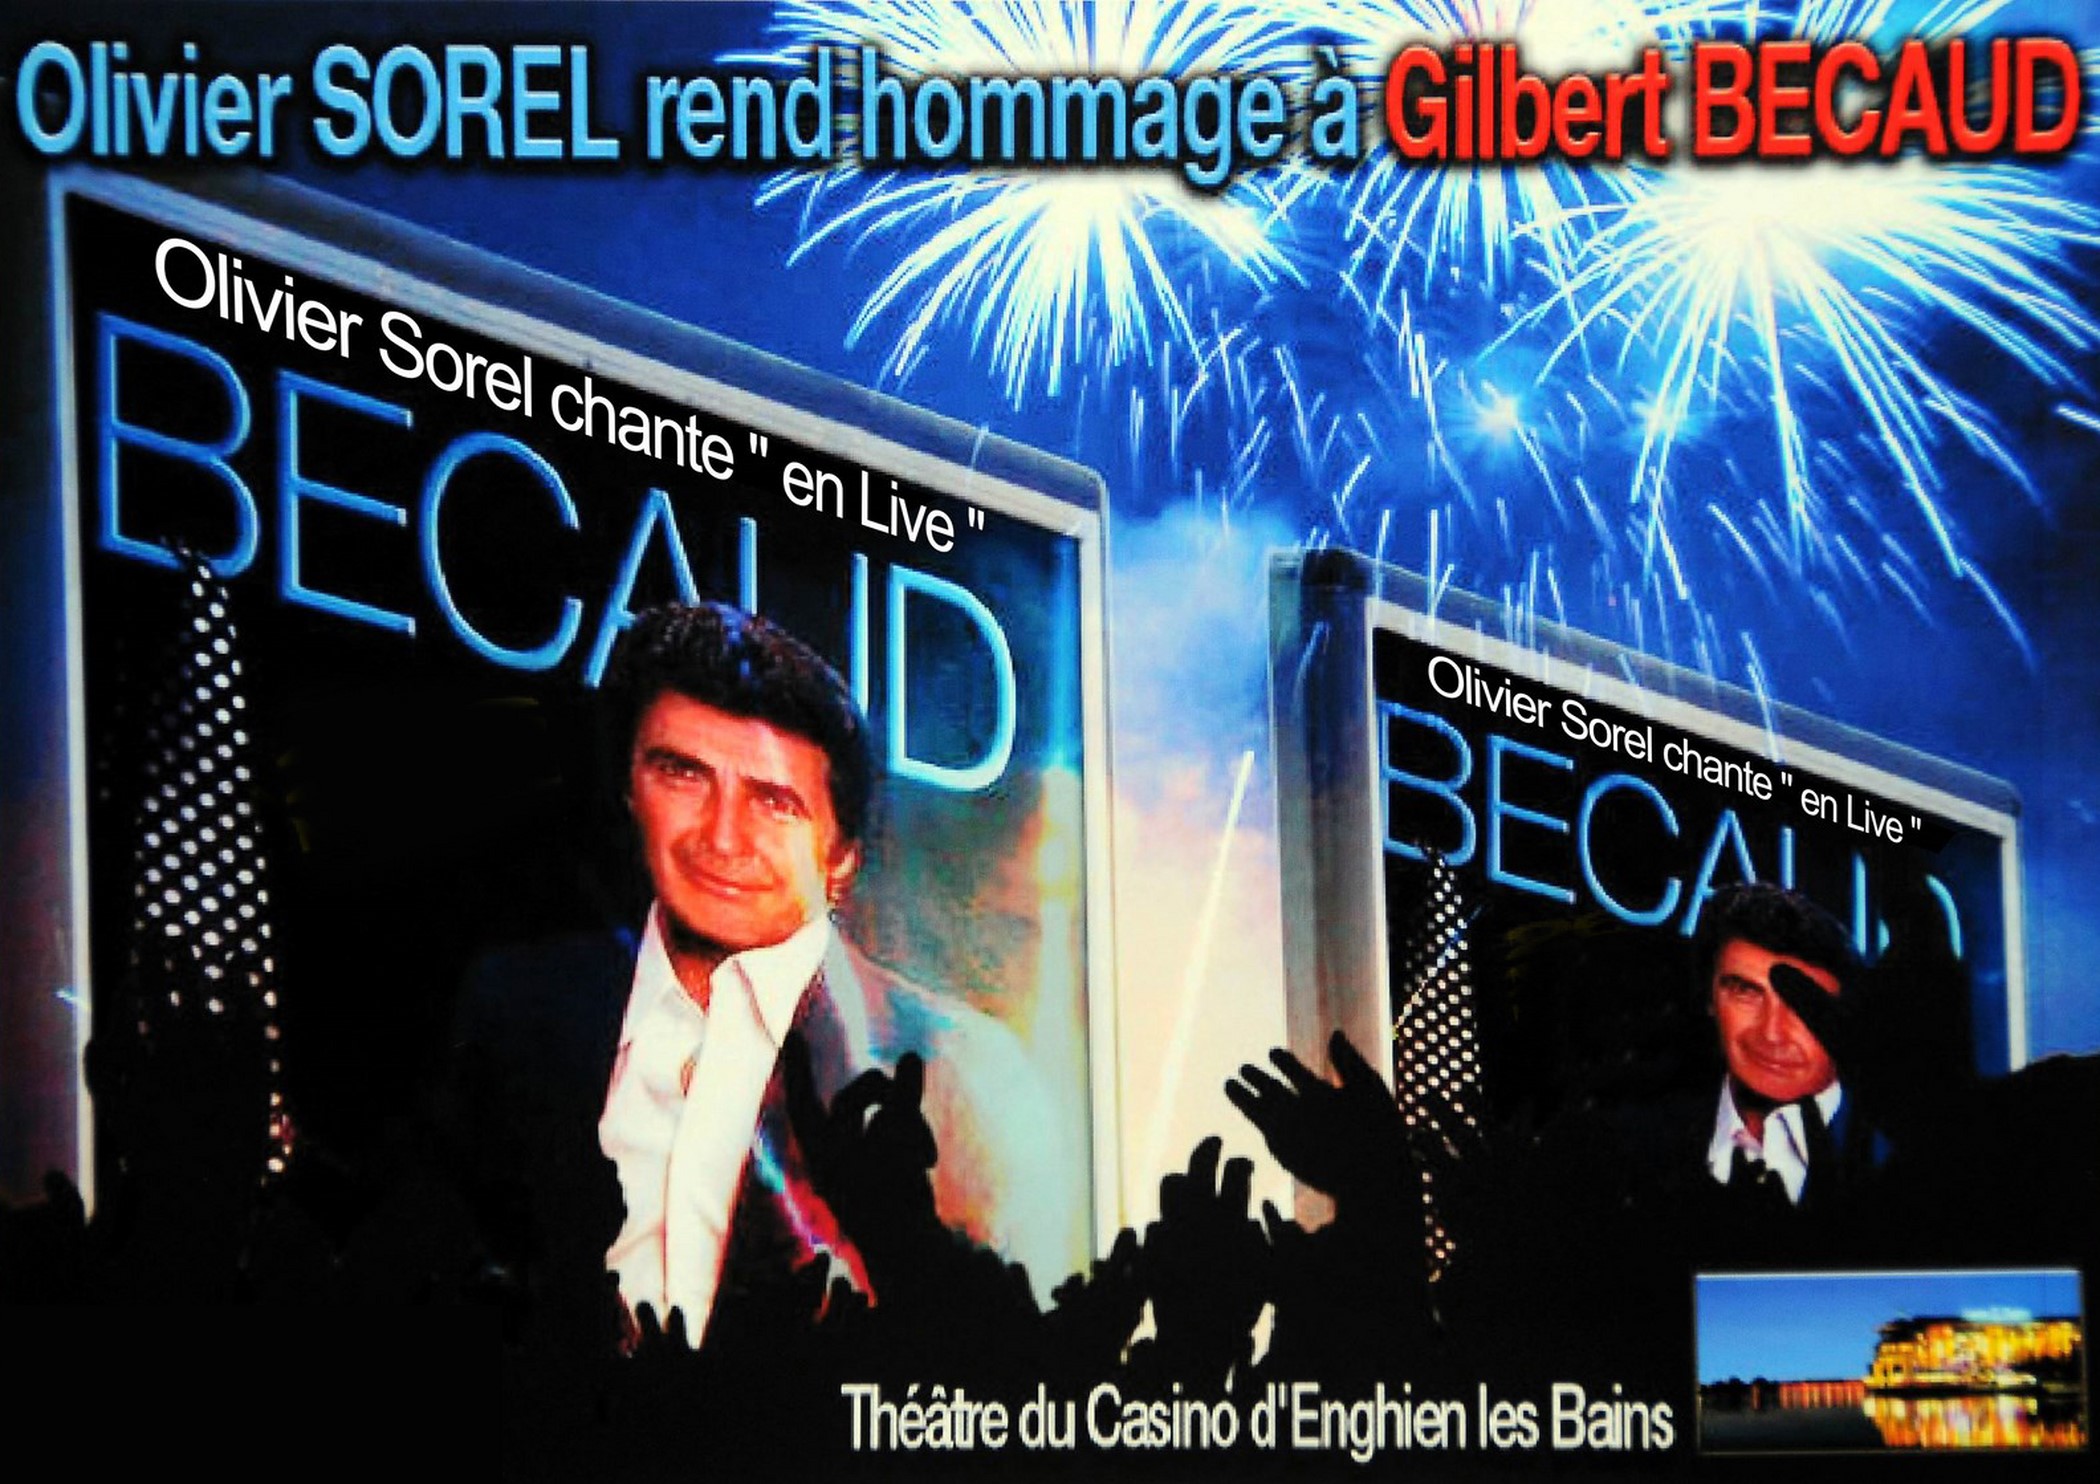 hommage_a_becaud_olivier_sorel_theatre_enghien-les_bains_spectacle.jpg